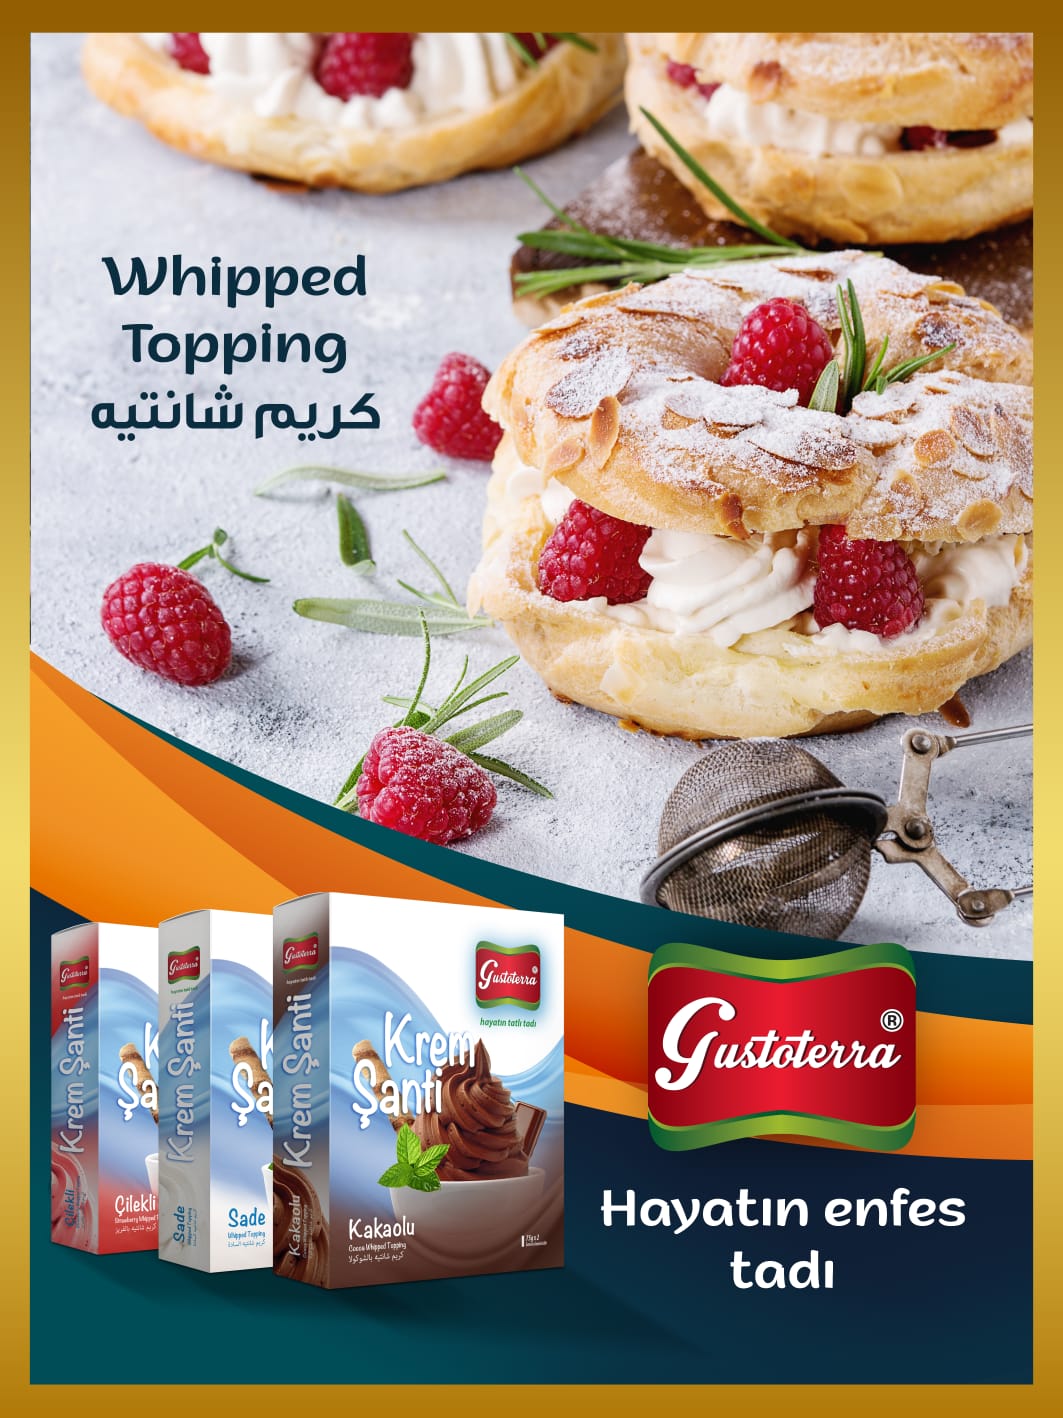 Product image - WHIPPED TOPPING (75gr x 2pcs) x 24 display
WHIPPED TOPPING COCOA (75gr x 2pcs) x 24 display
WHIPPED TOPPING STRAWBERRY (75gr x 2pcs) x 24 display